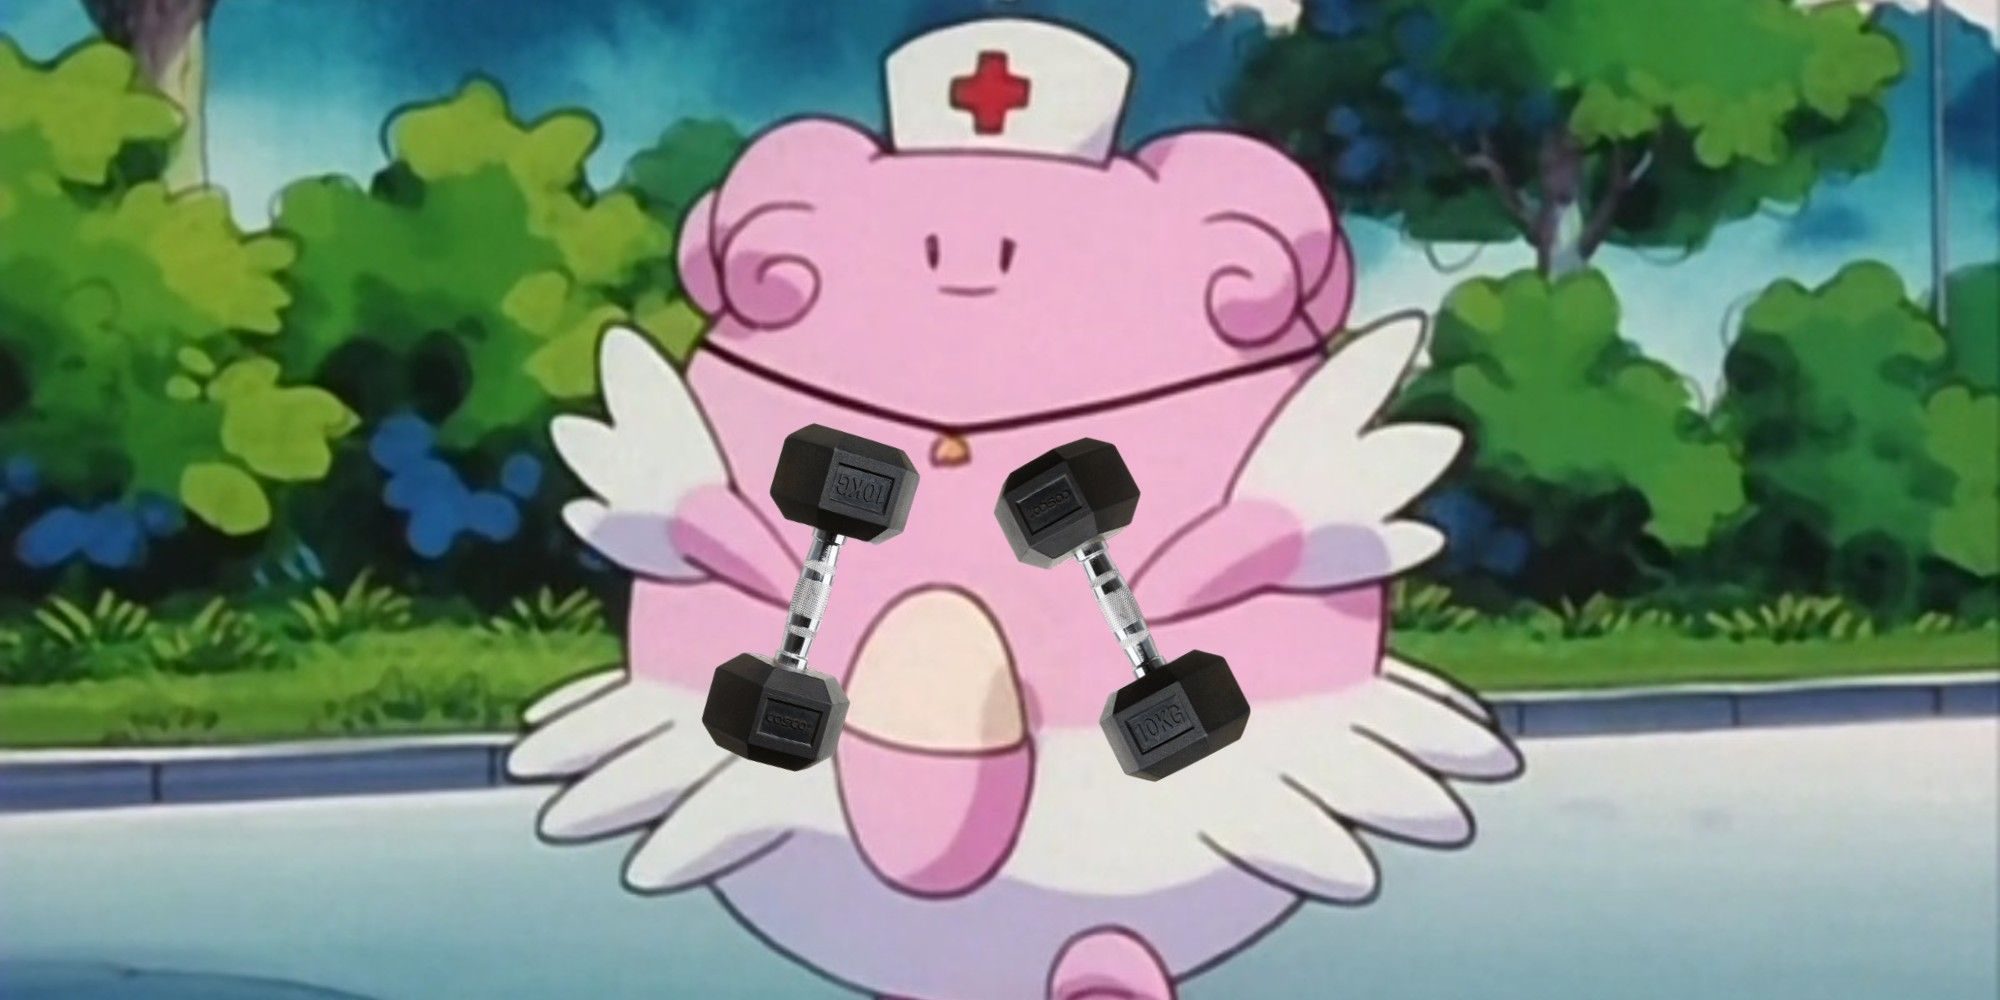 blissey-lifting-weights-3512754